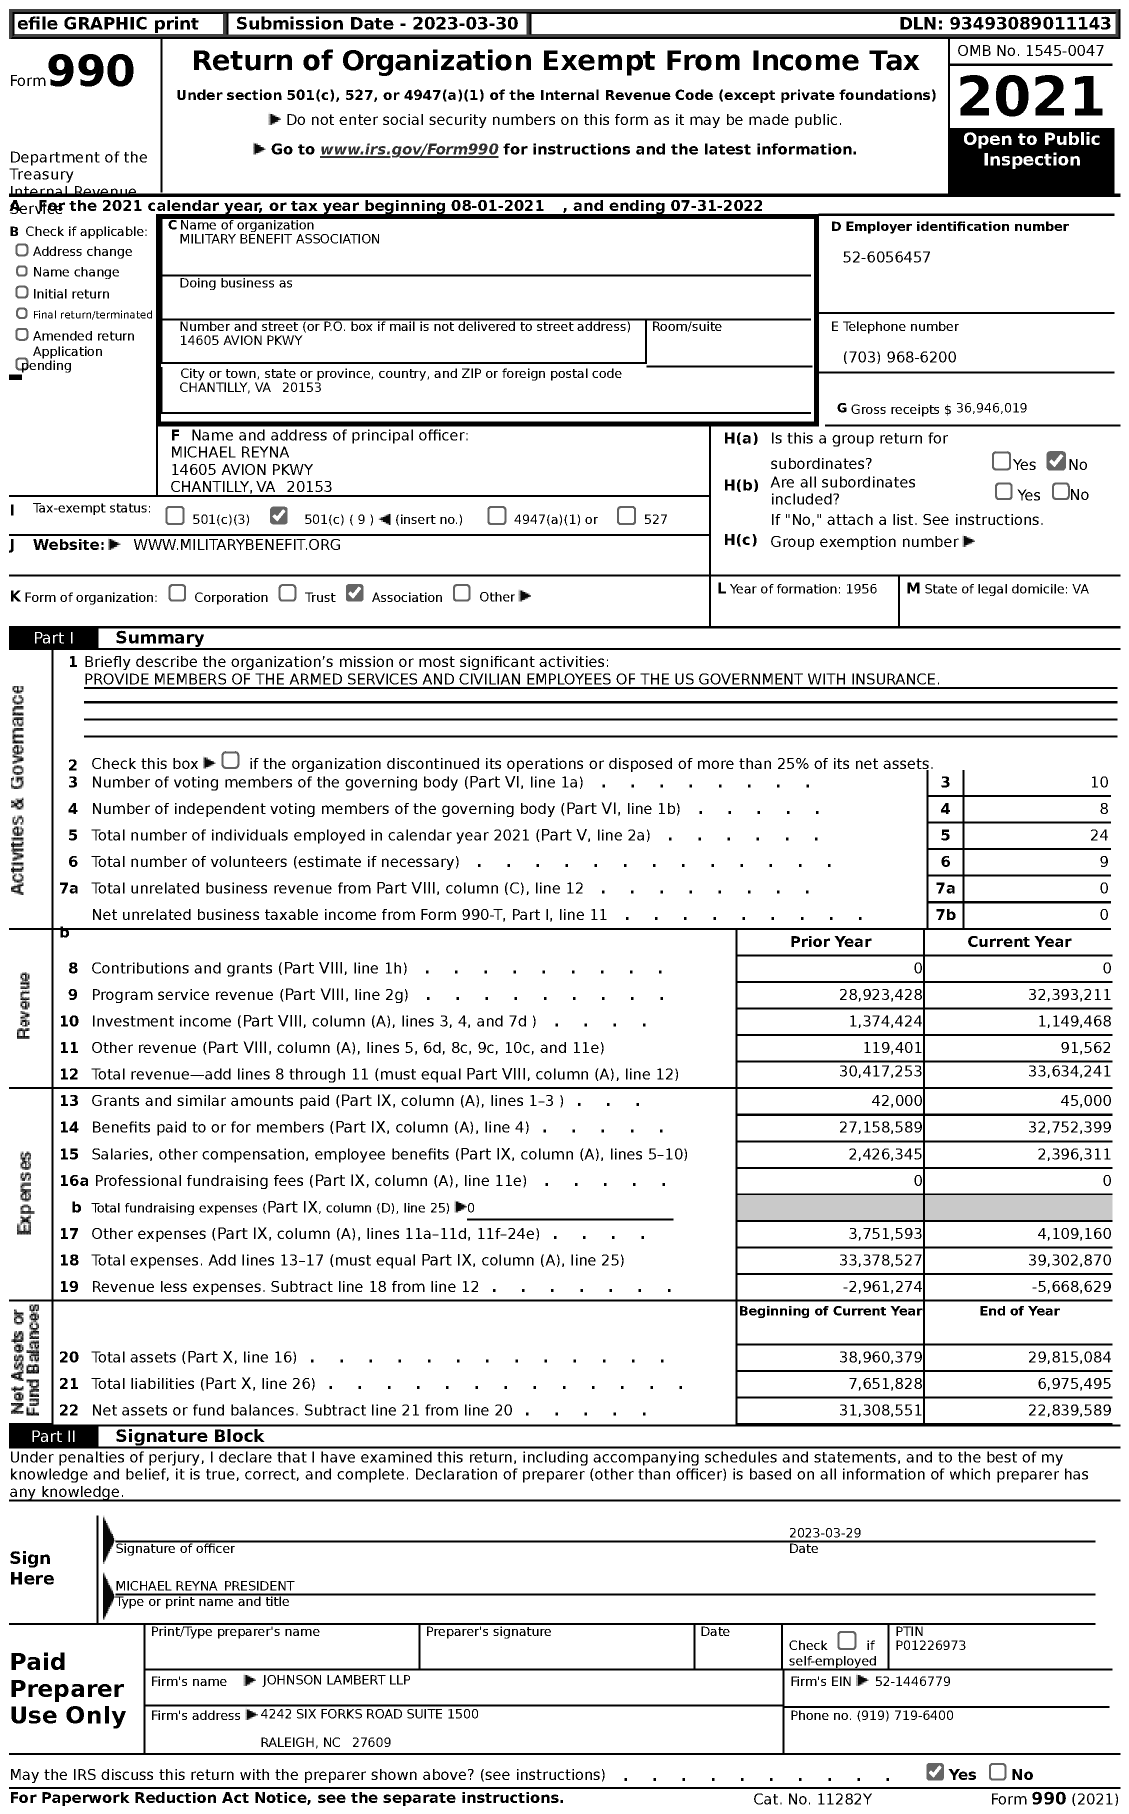 Image of first page of 2021 Form 990 for Military Benefit Association (MBA)